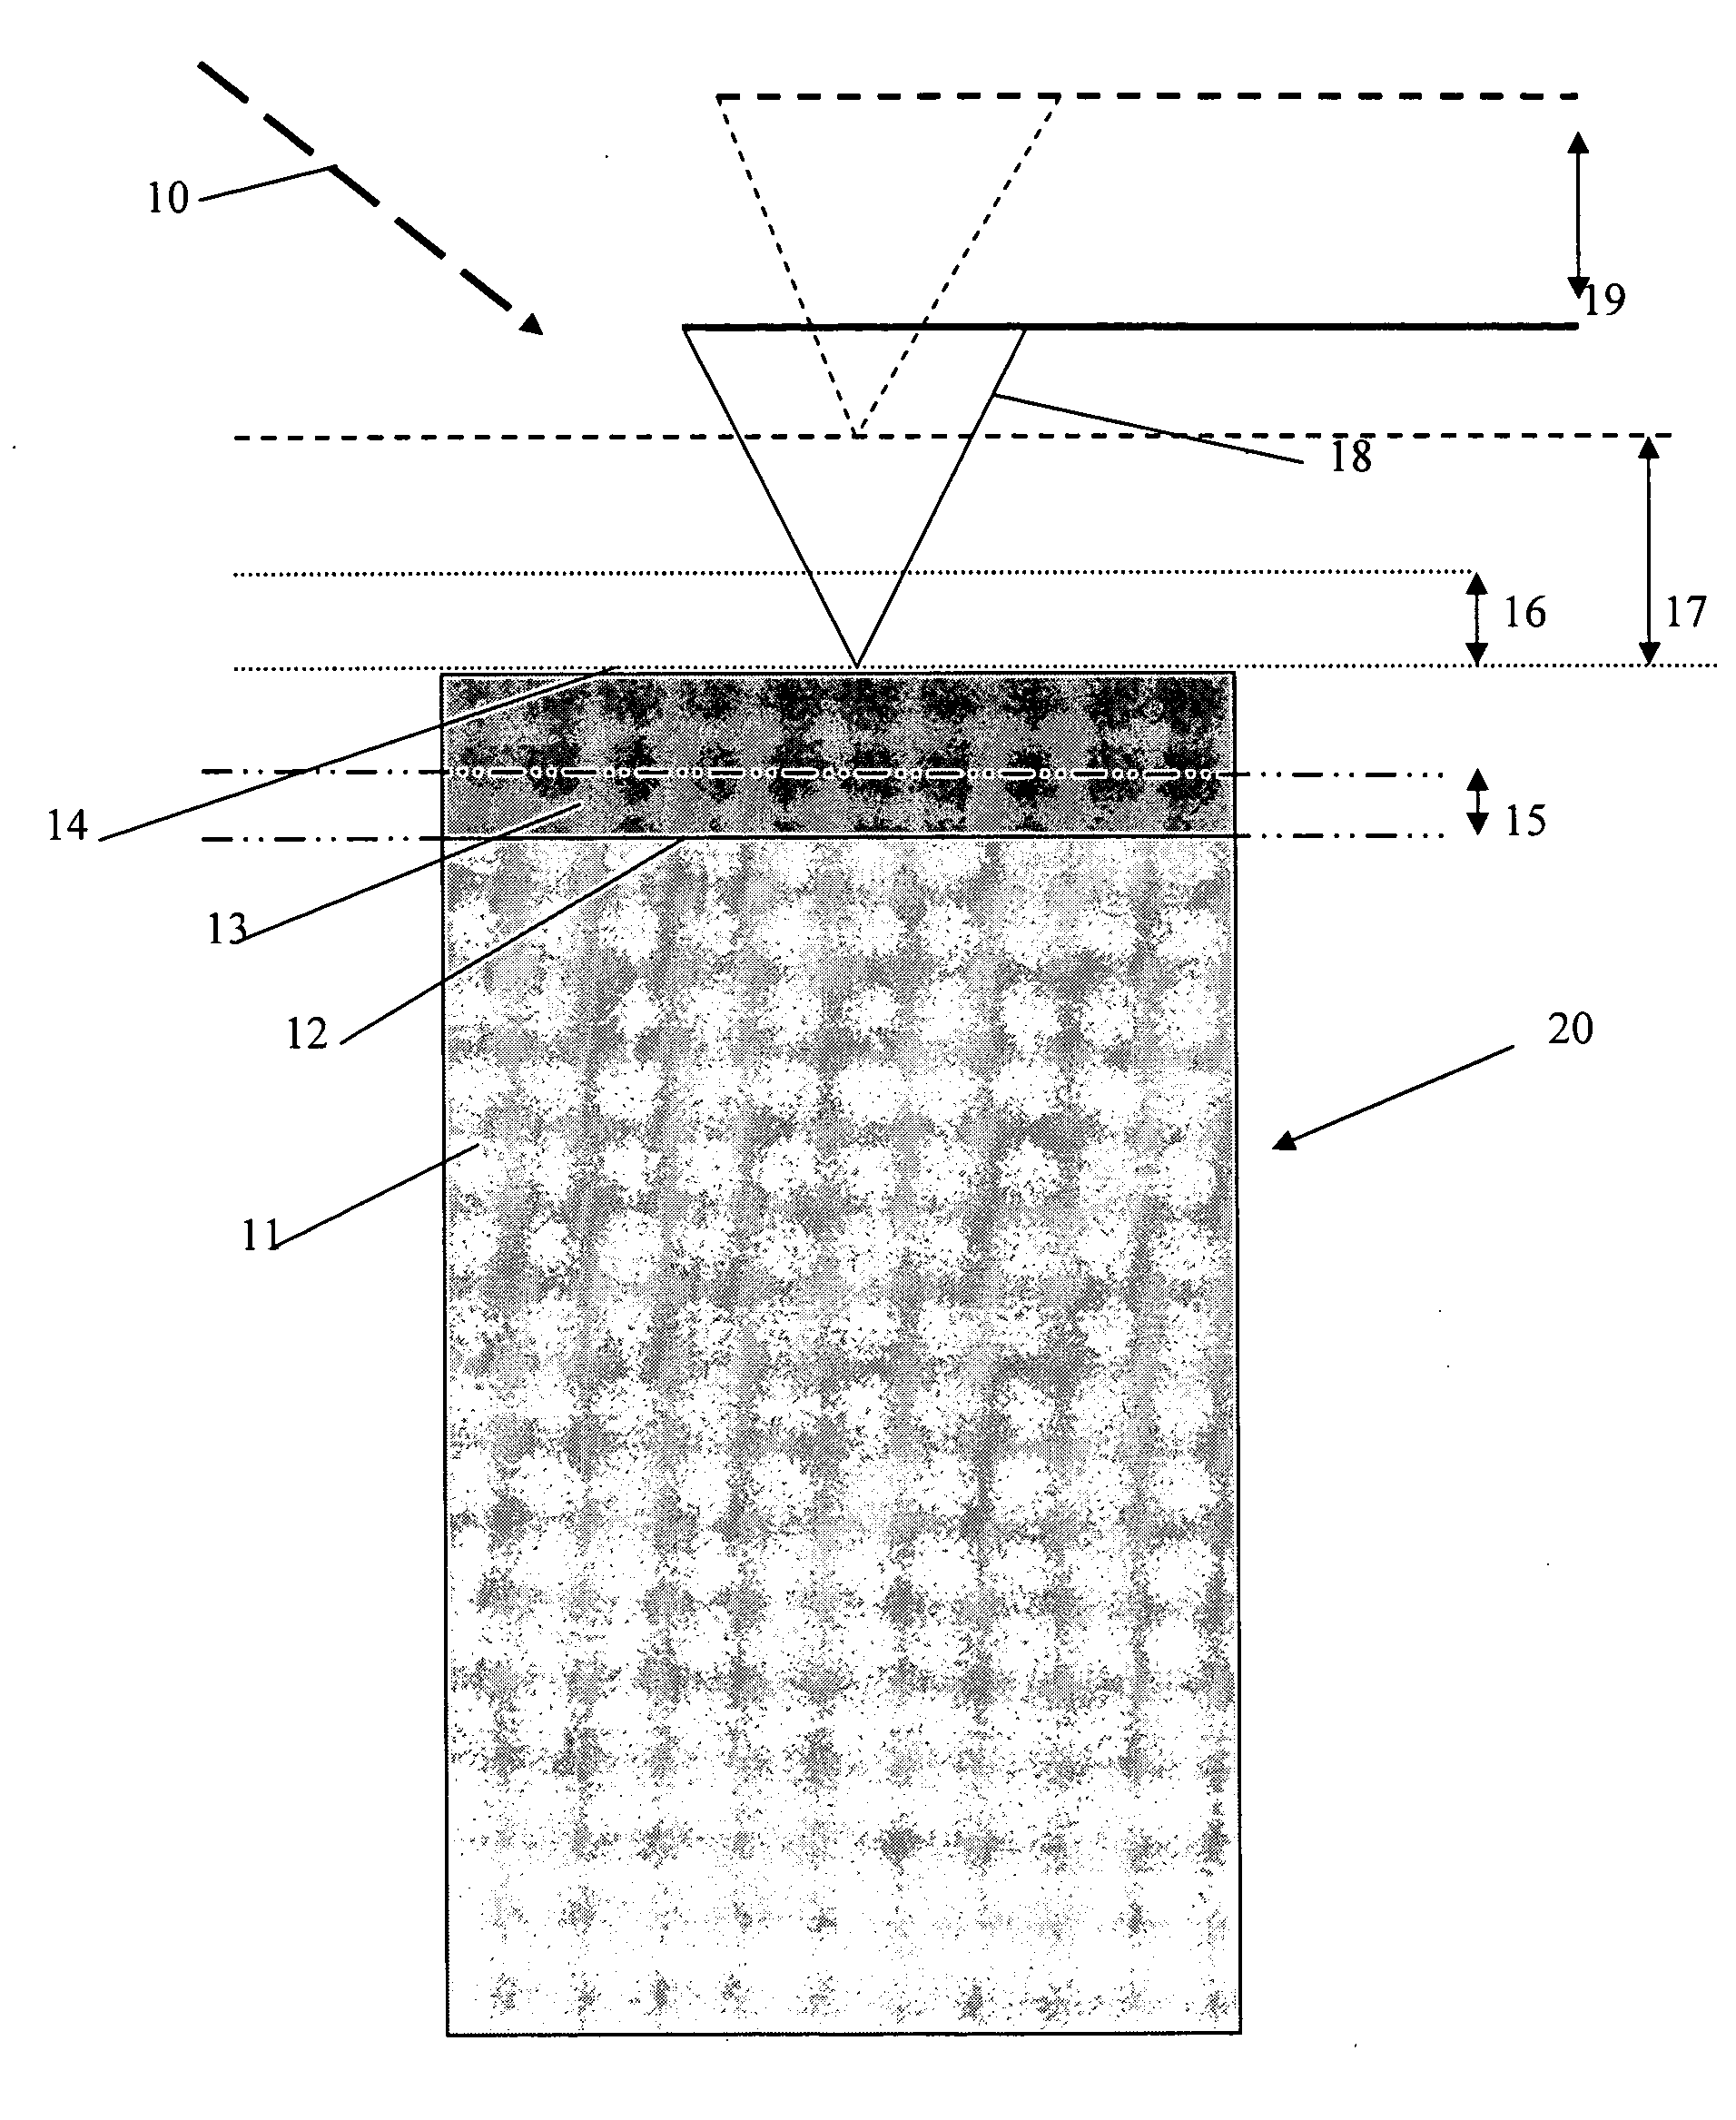 Method and apparatus for localized infrared spectrocopy and micro-tomography using a combination of thermal expansion and temperature change measurements